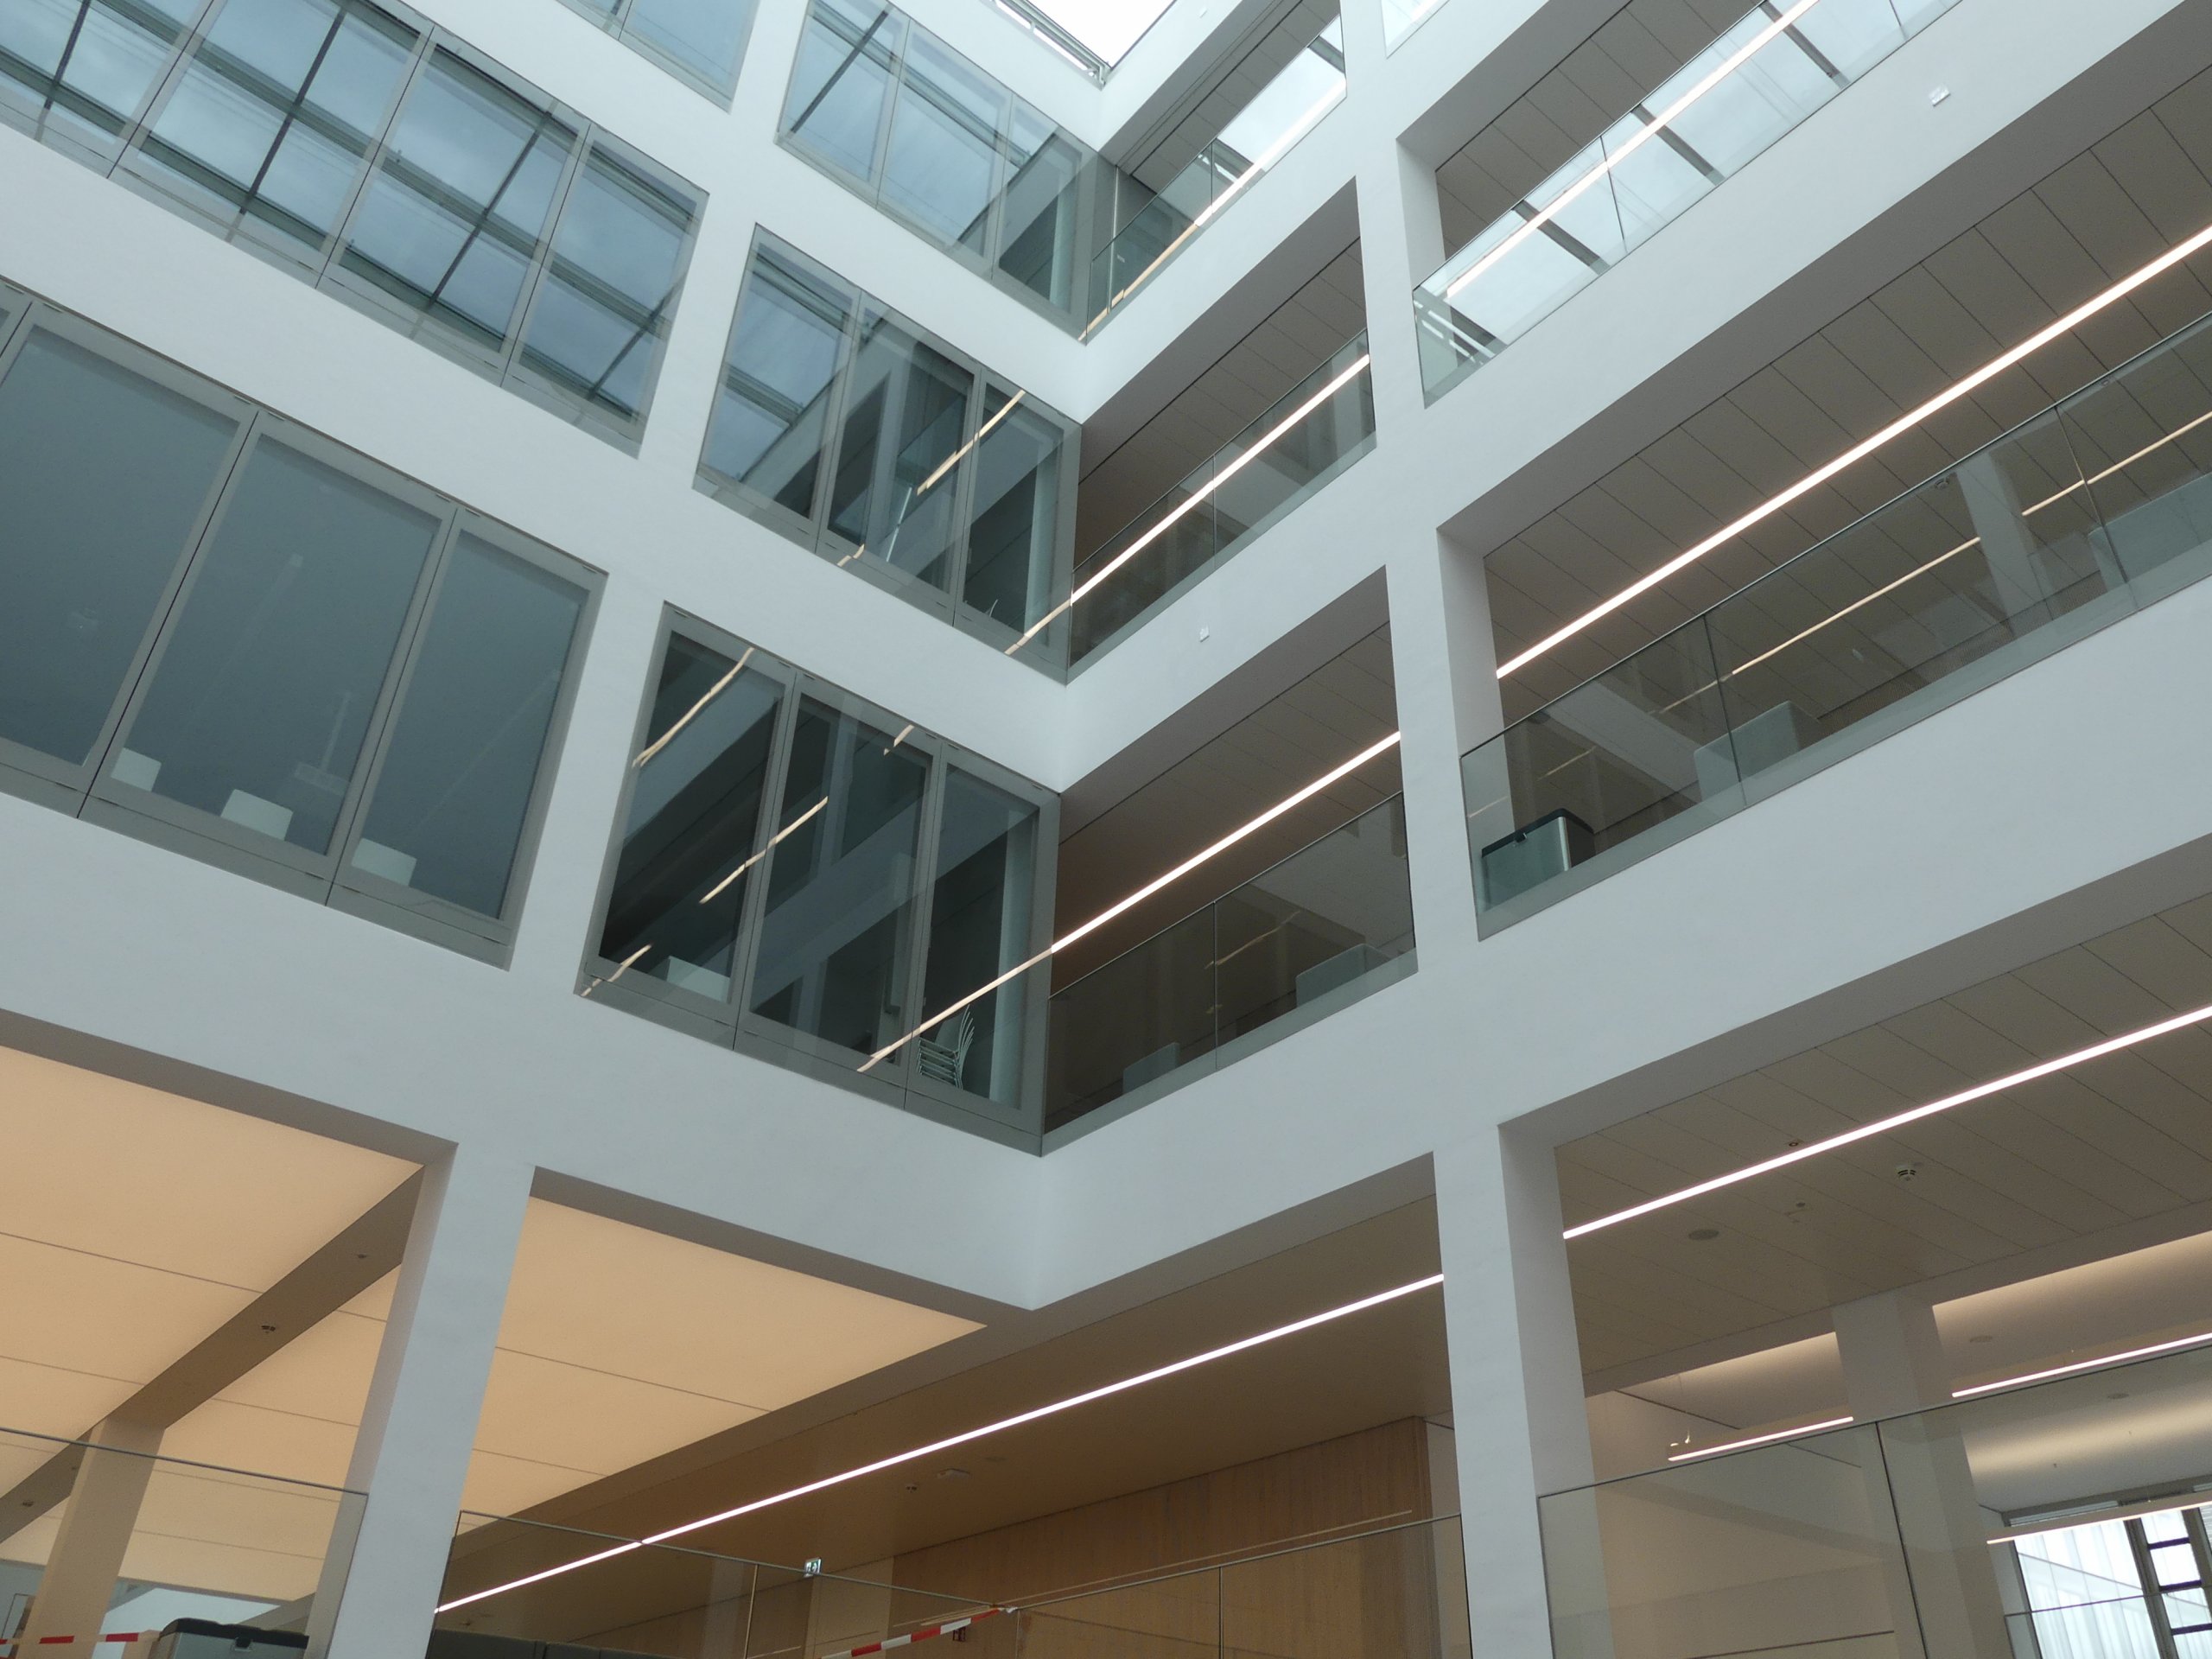 Interior view of the T-building at the Bildungscampus in Heilbronn, Germany